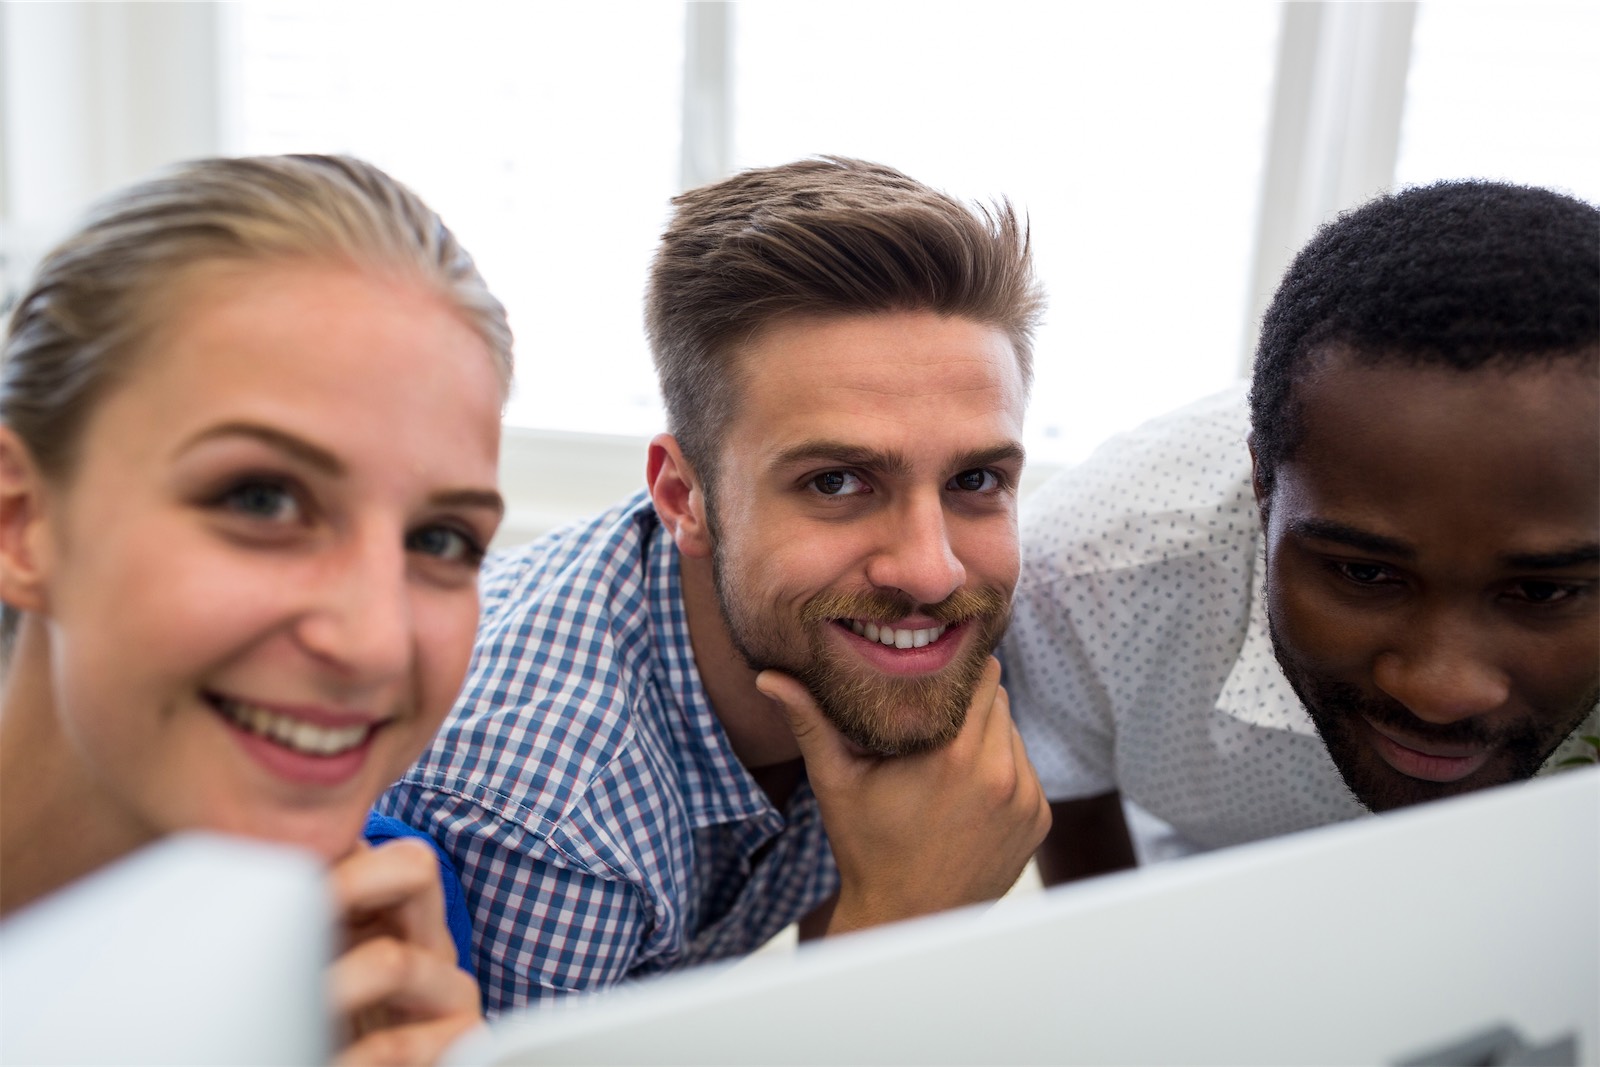 The image shows a group of graphic designers smiling while working on computer. Transform your business with a Learning Experience Platform.